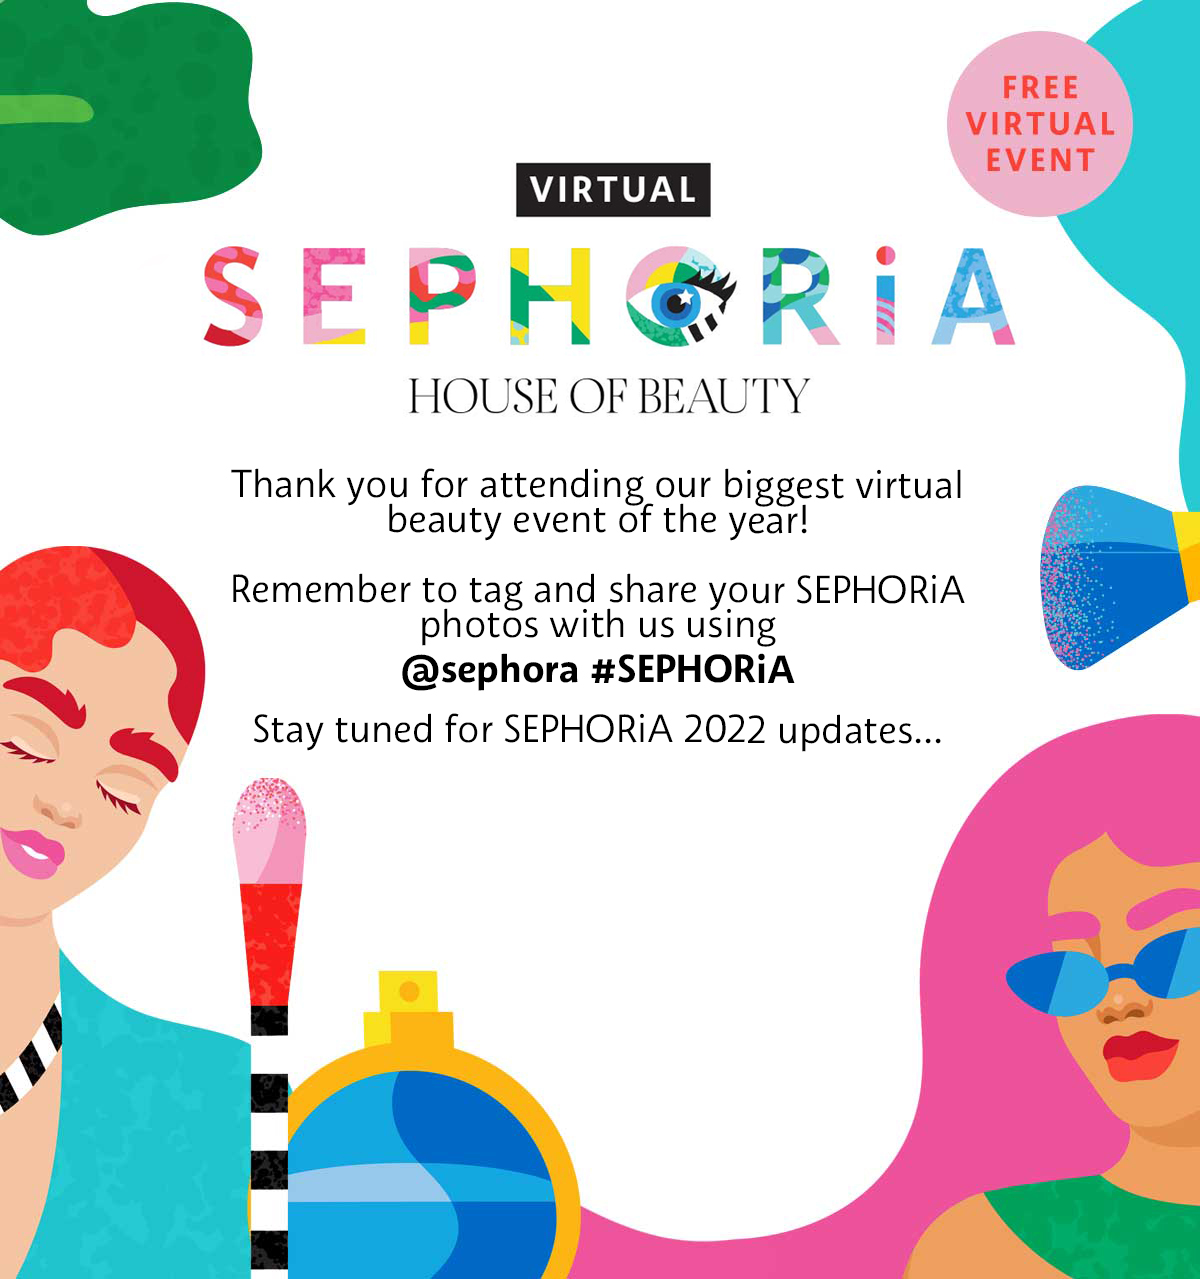 Sephora 2021 Post Show Banner. Thank you for attending our biggest virtual beauty event of the year. Remember to tag and share your SEPHORiA photos with us using username Sephora and hashtag SEPHORiA. Stay tuned for SEPHORiA 2022 updates.